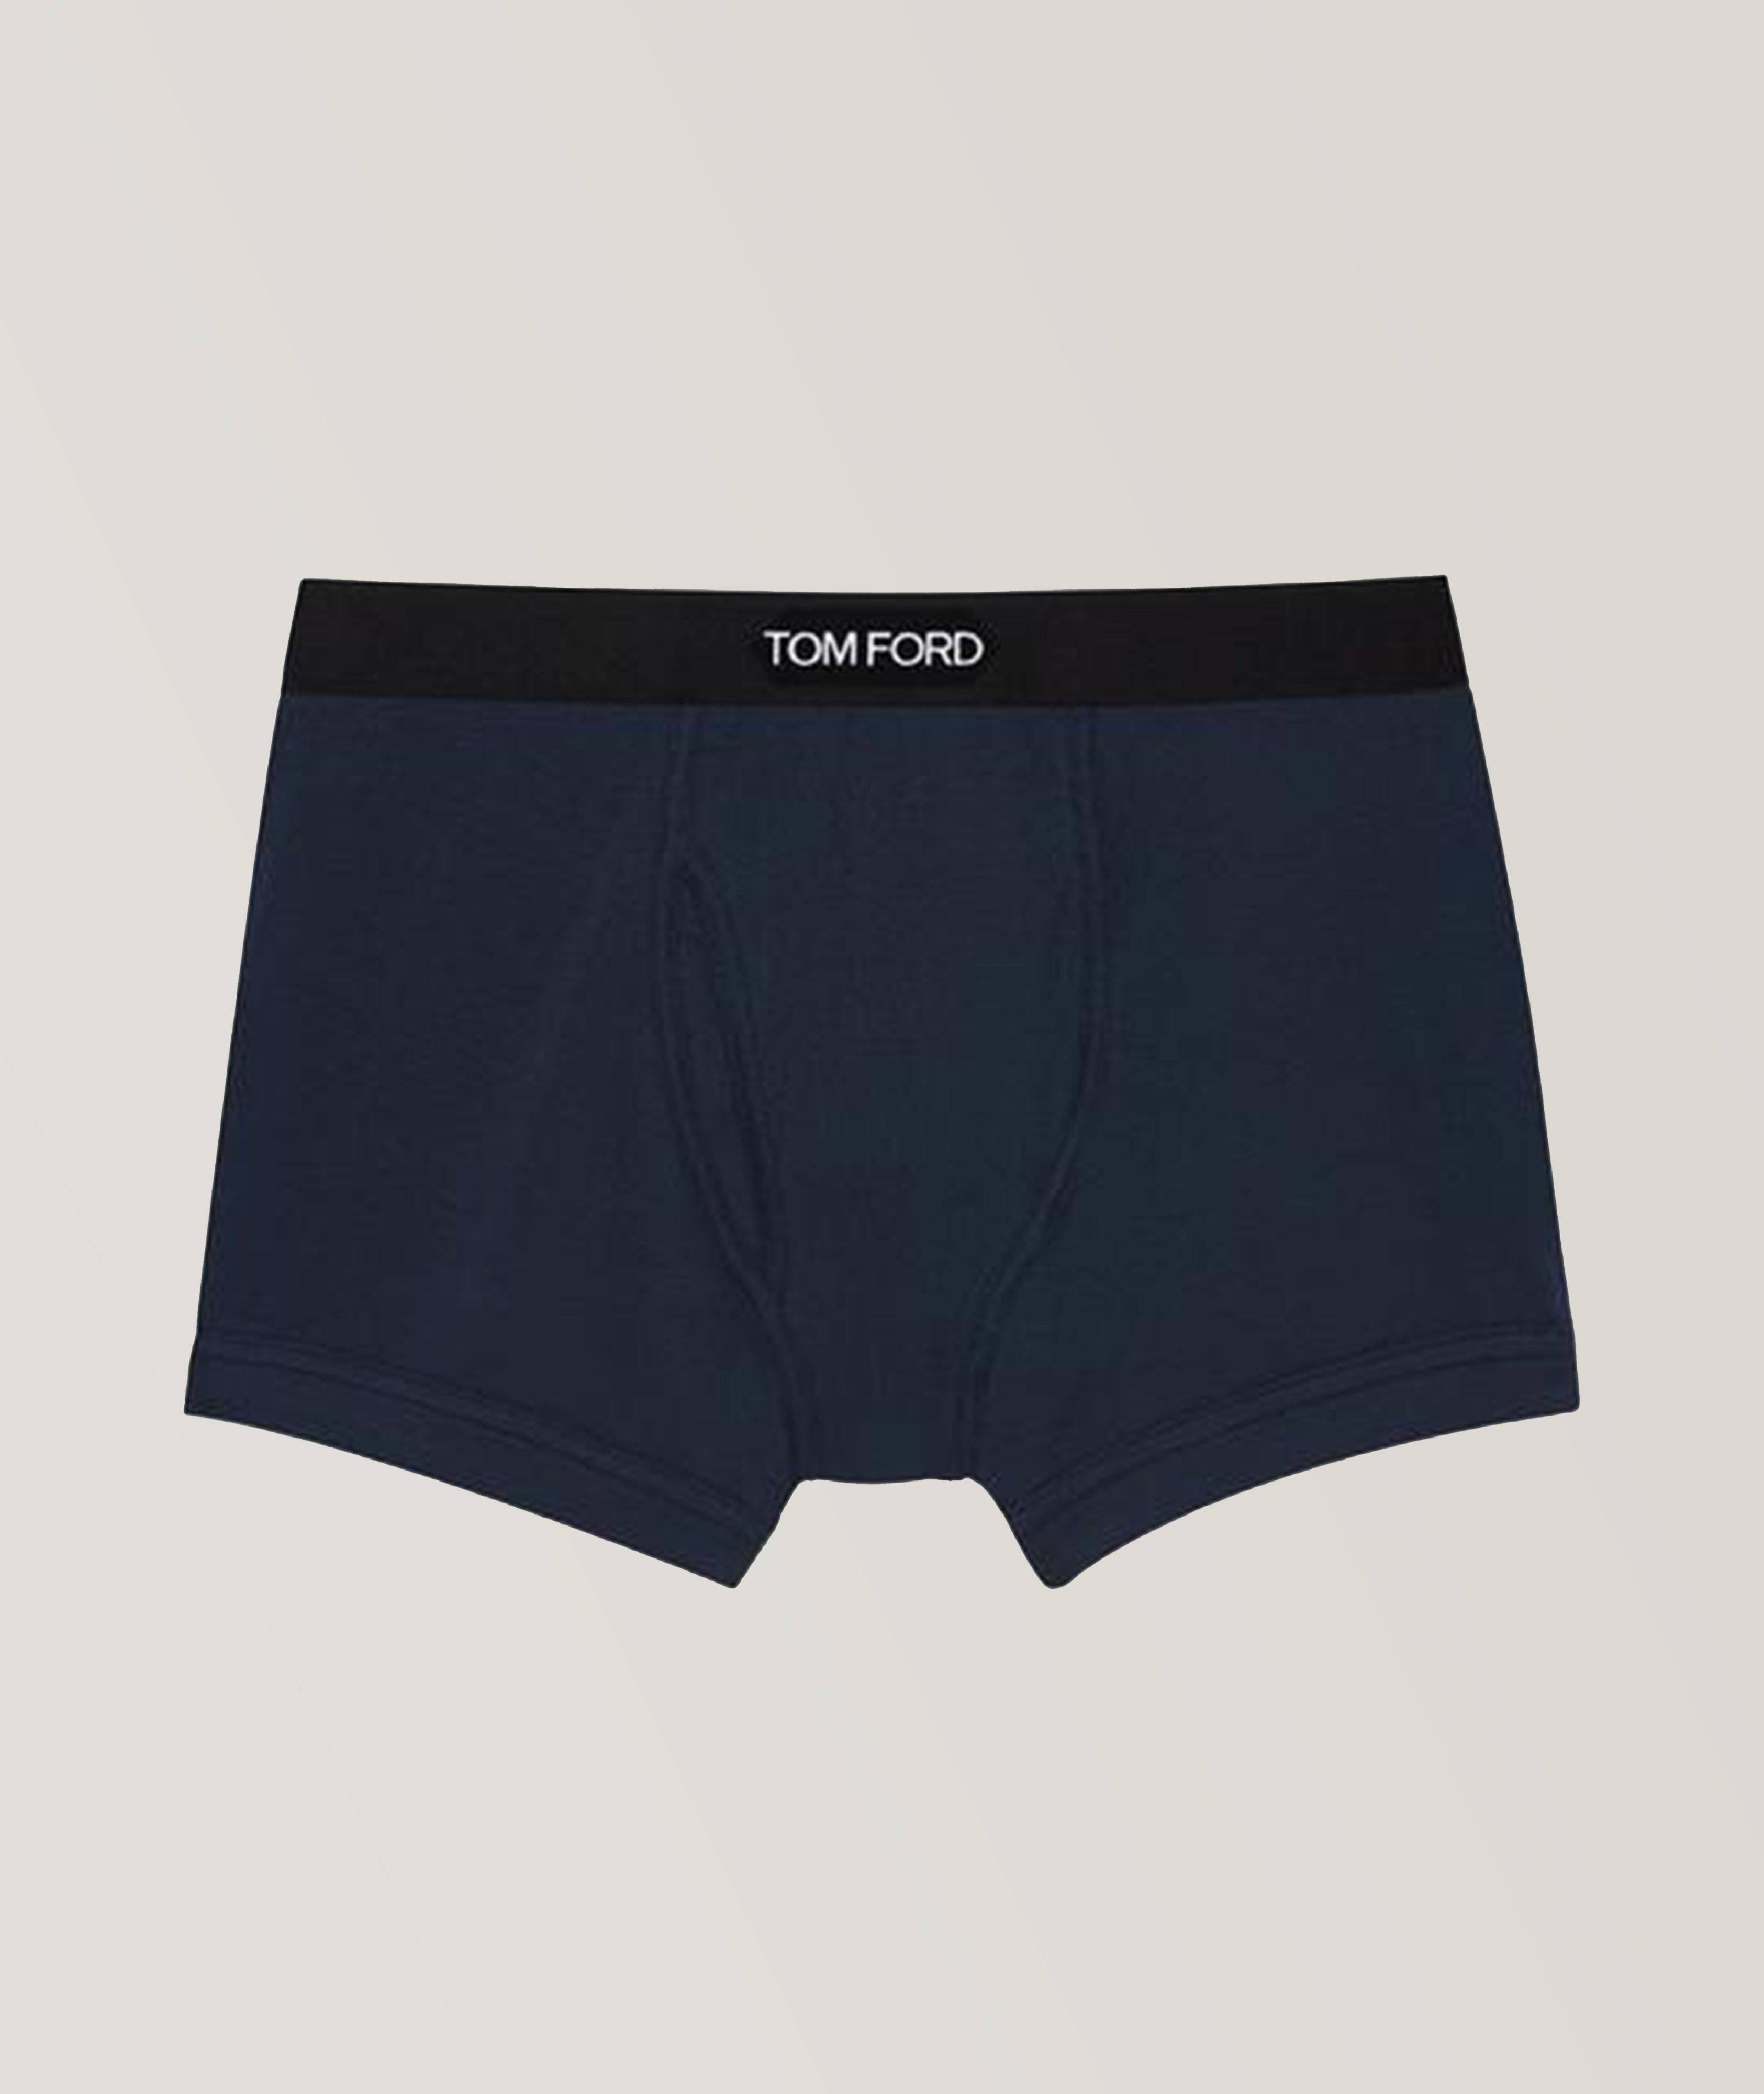 Boxers of Briefs? 🤔 LINK IN BIO for a complete guide on buying